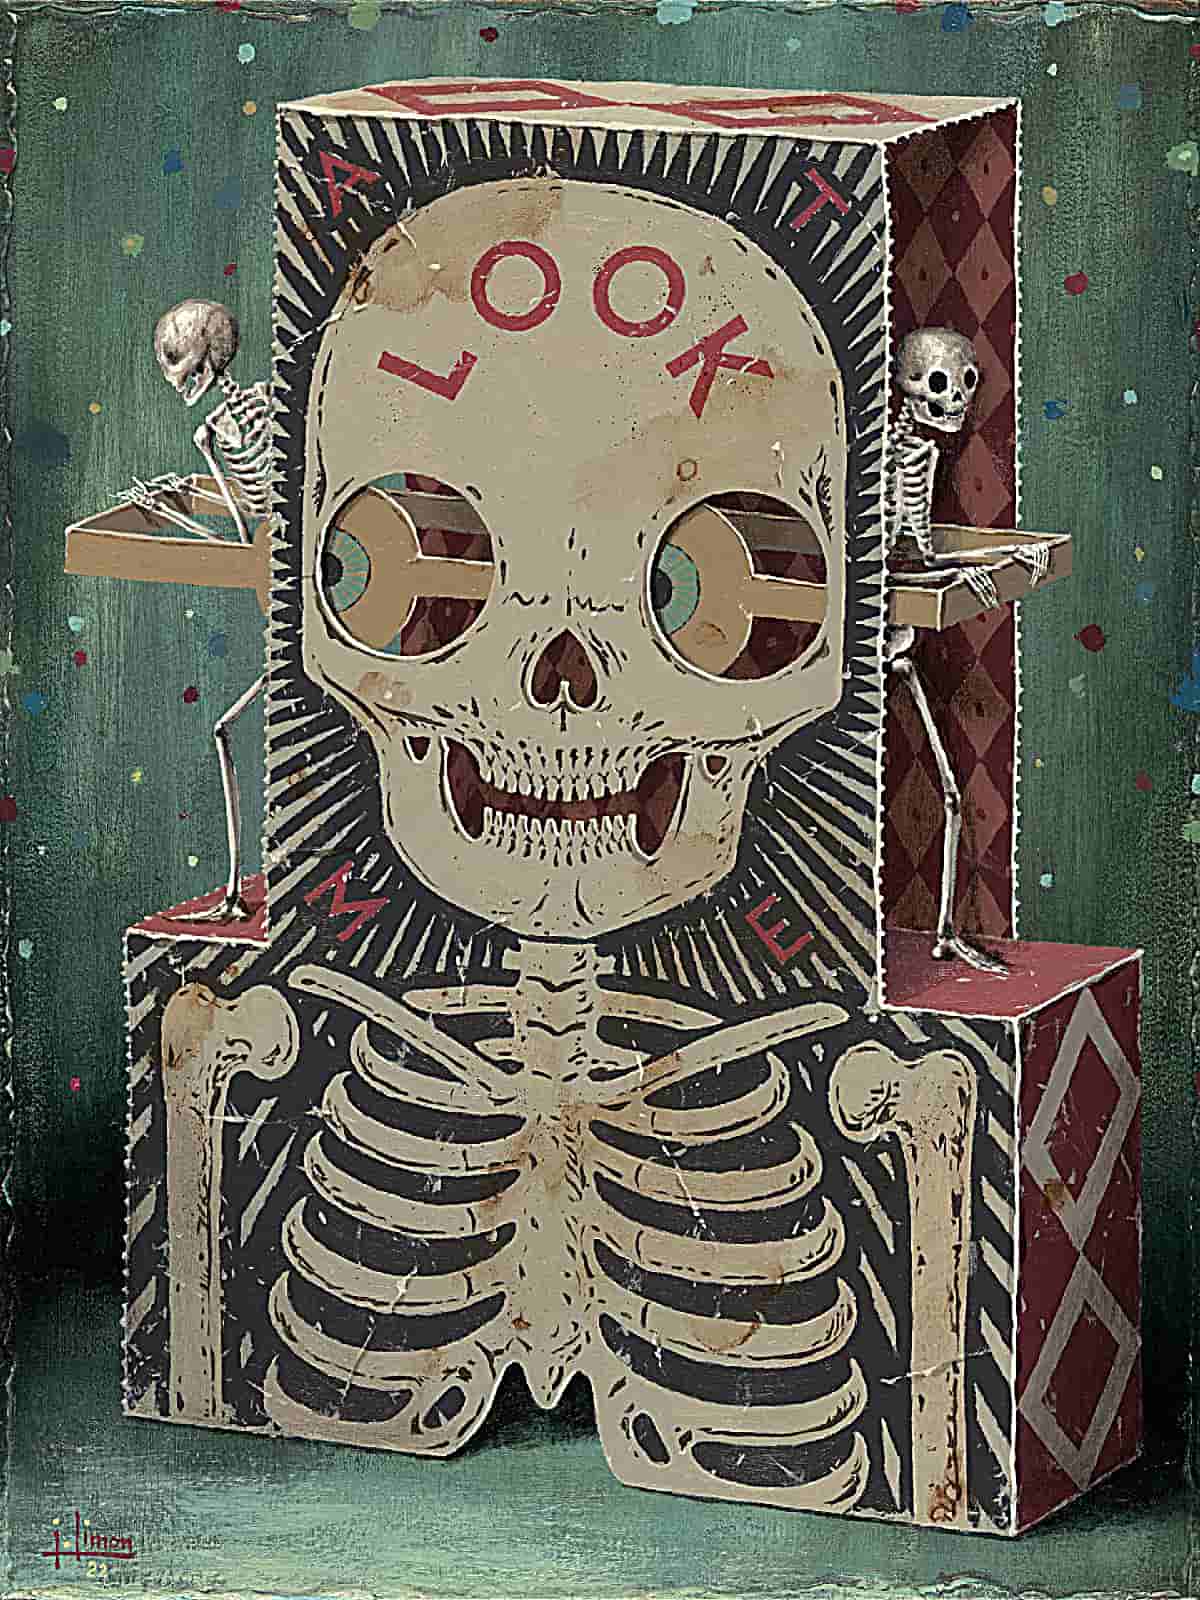 Paper constructions confine skeletons to uncanny spaces of the paintings conjures paper sculptures of 18th Century-style gowns, organs, and hollowed skulls with acrylic paint.